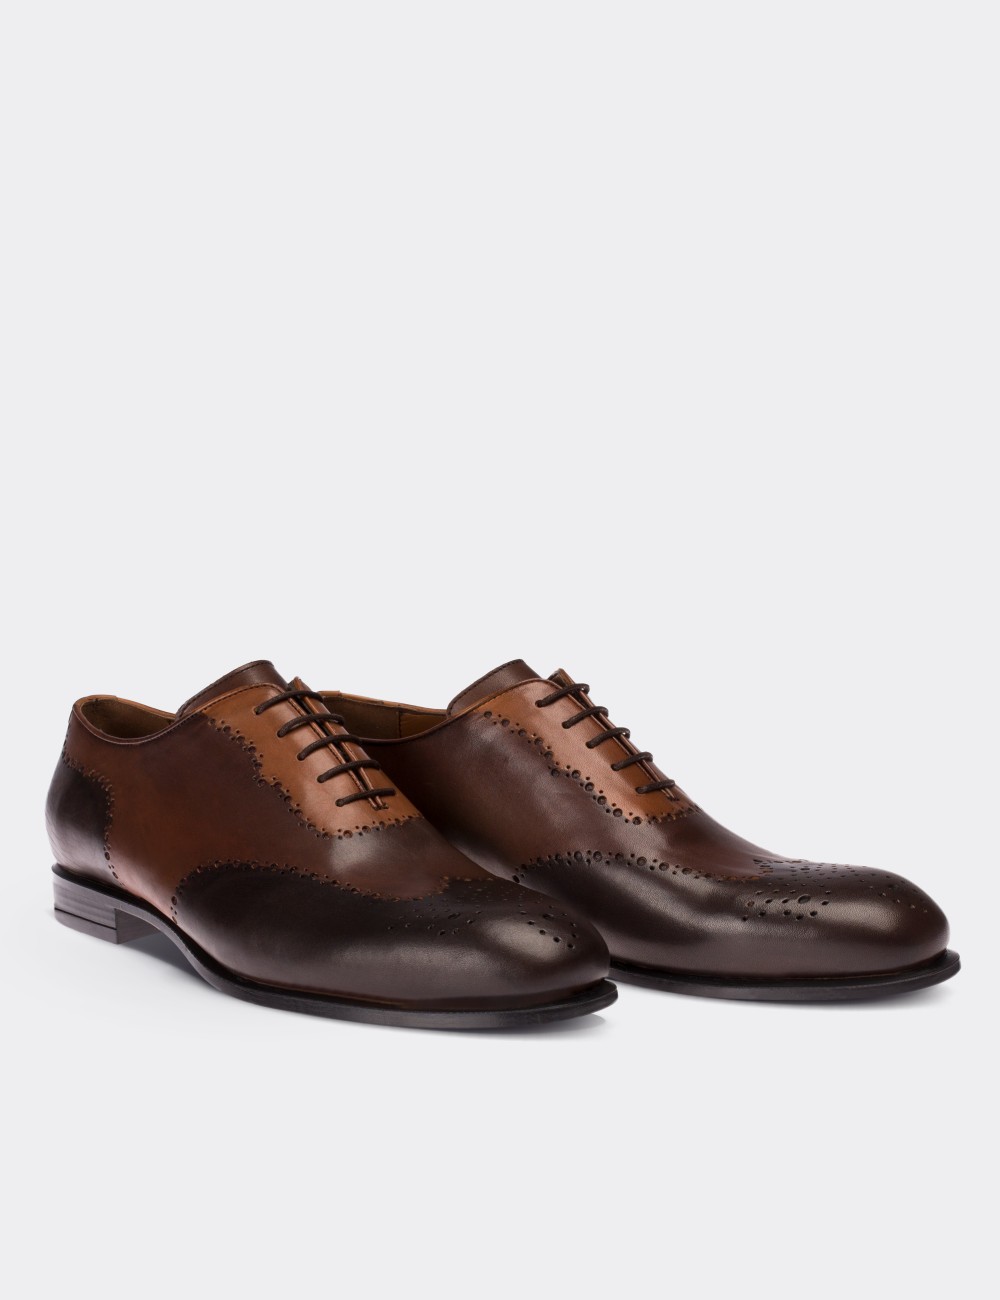 Brown Calfskin Leather Classic Shoes - Deery